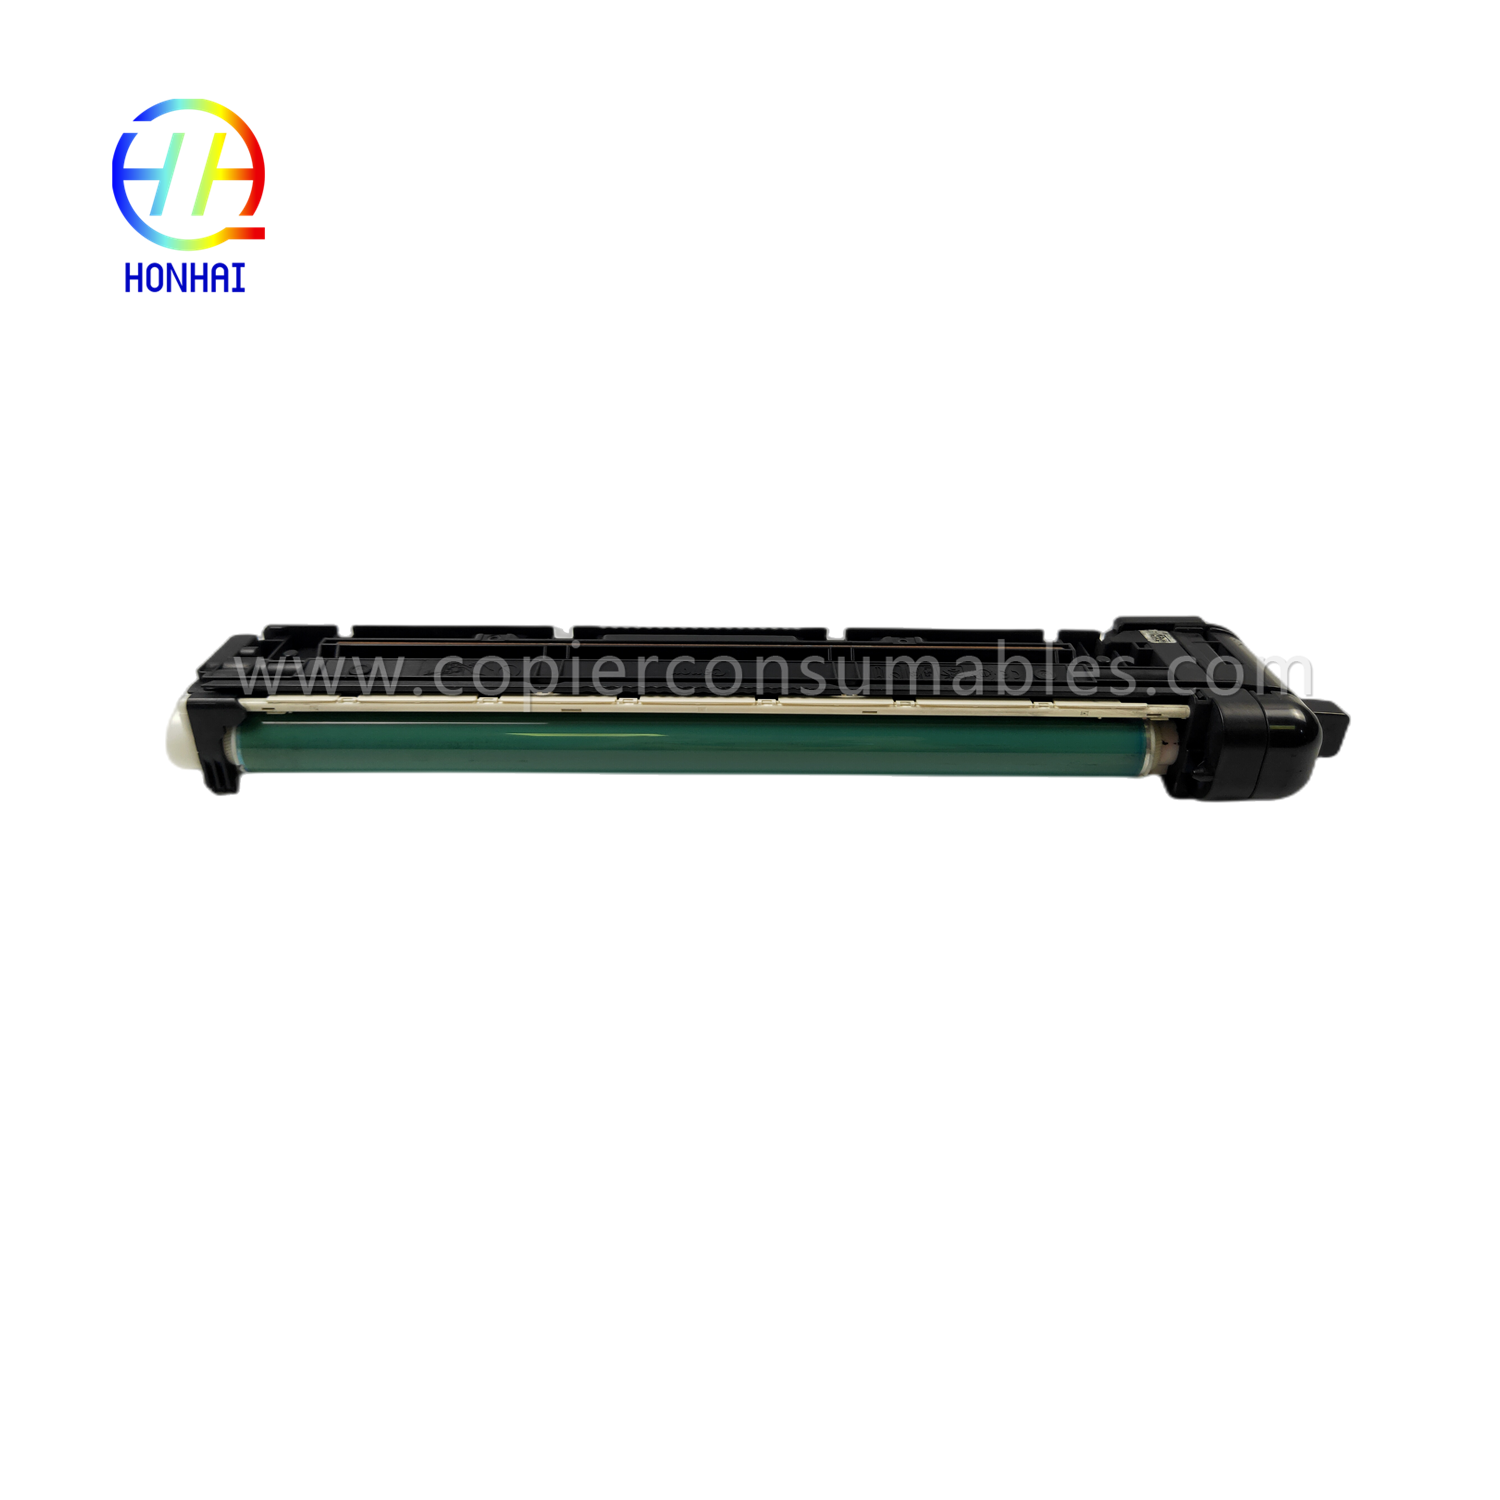 https://c585.goodao.net/drum-unit-for-canon-ir-c255if-c350p-c355if-c350if-product/